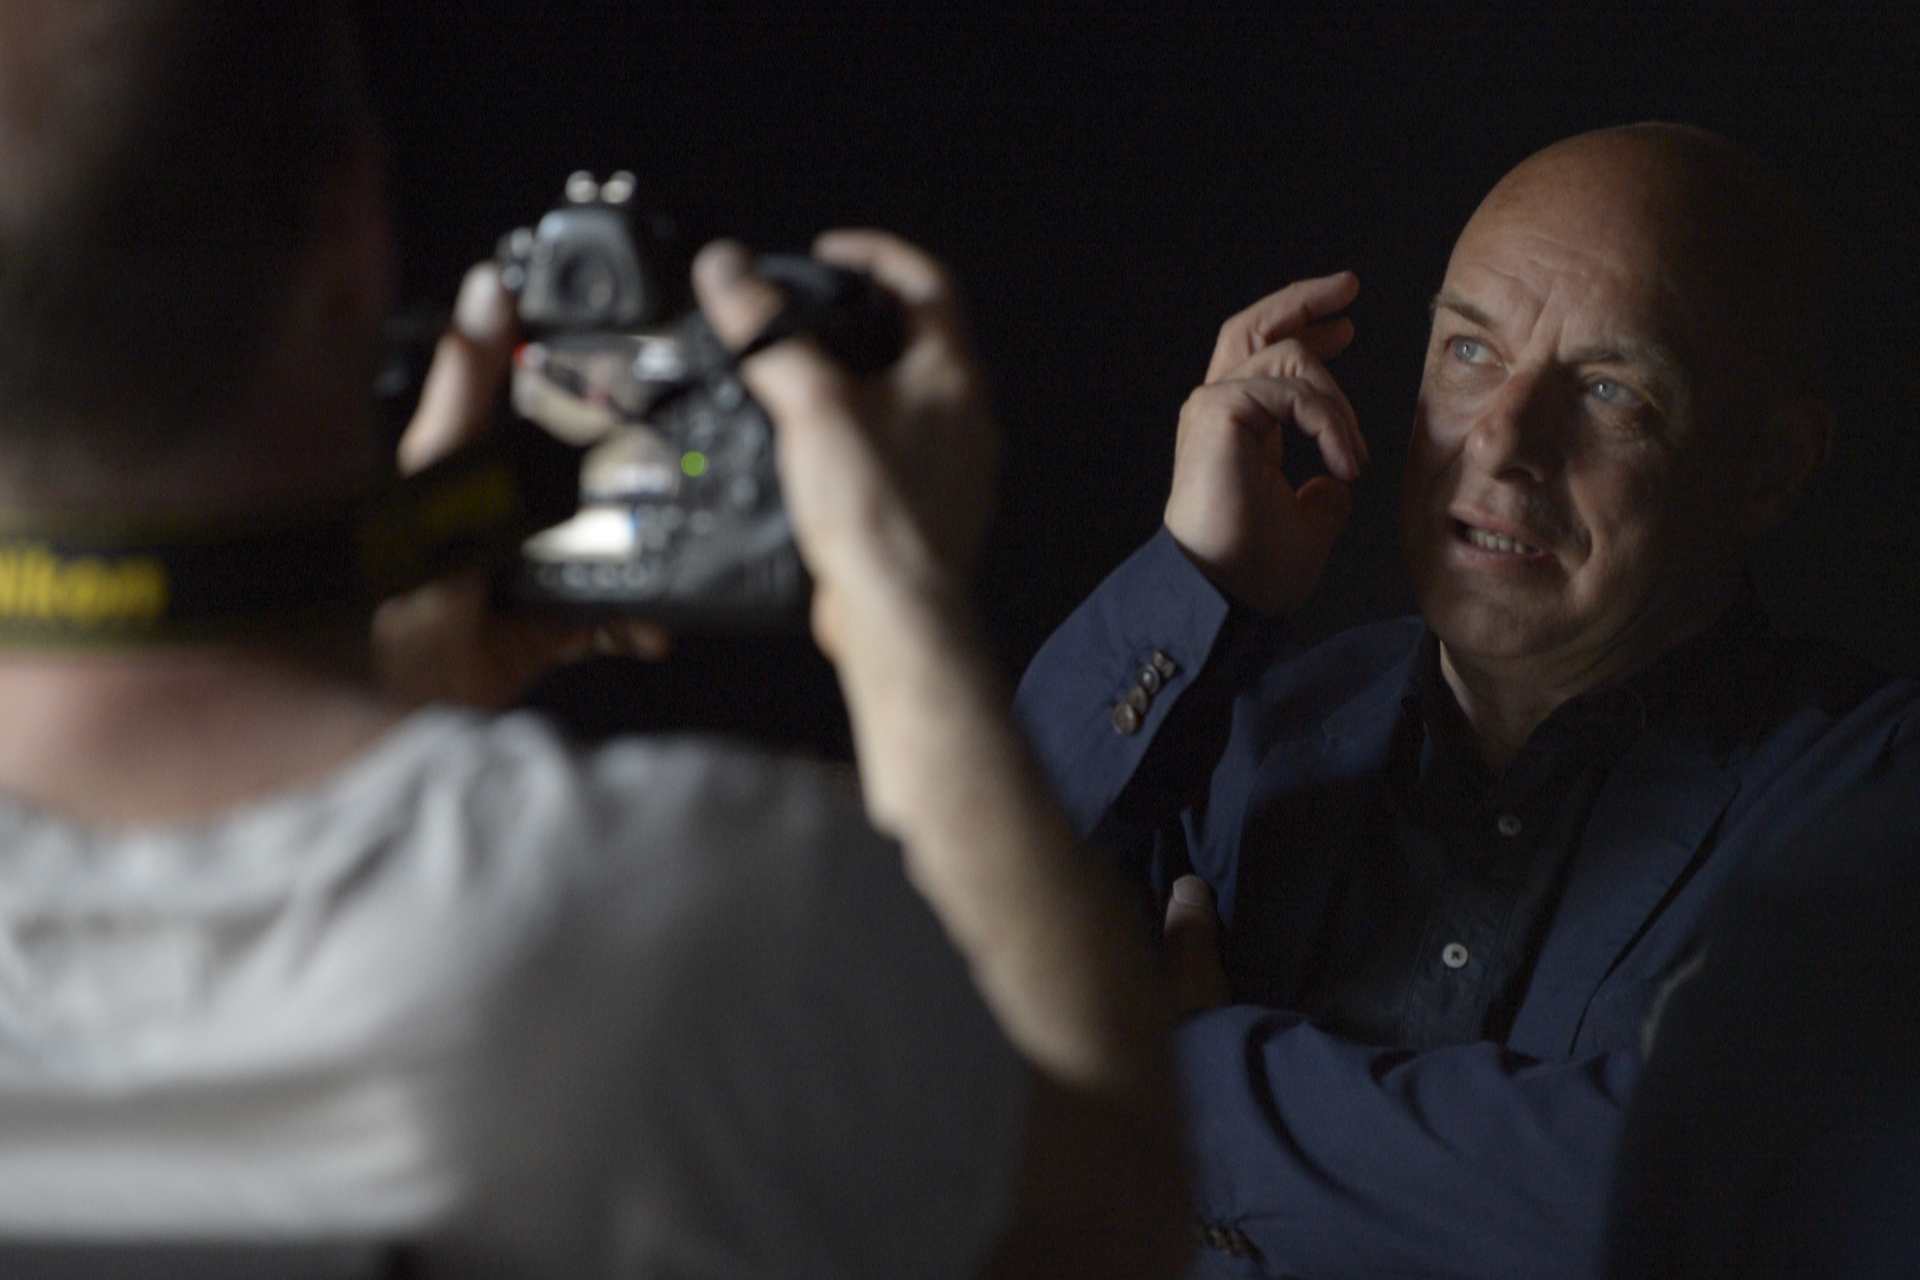 Brian Eno in What Difference Does It Make? A Film About Making Music (2014)